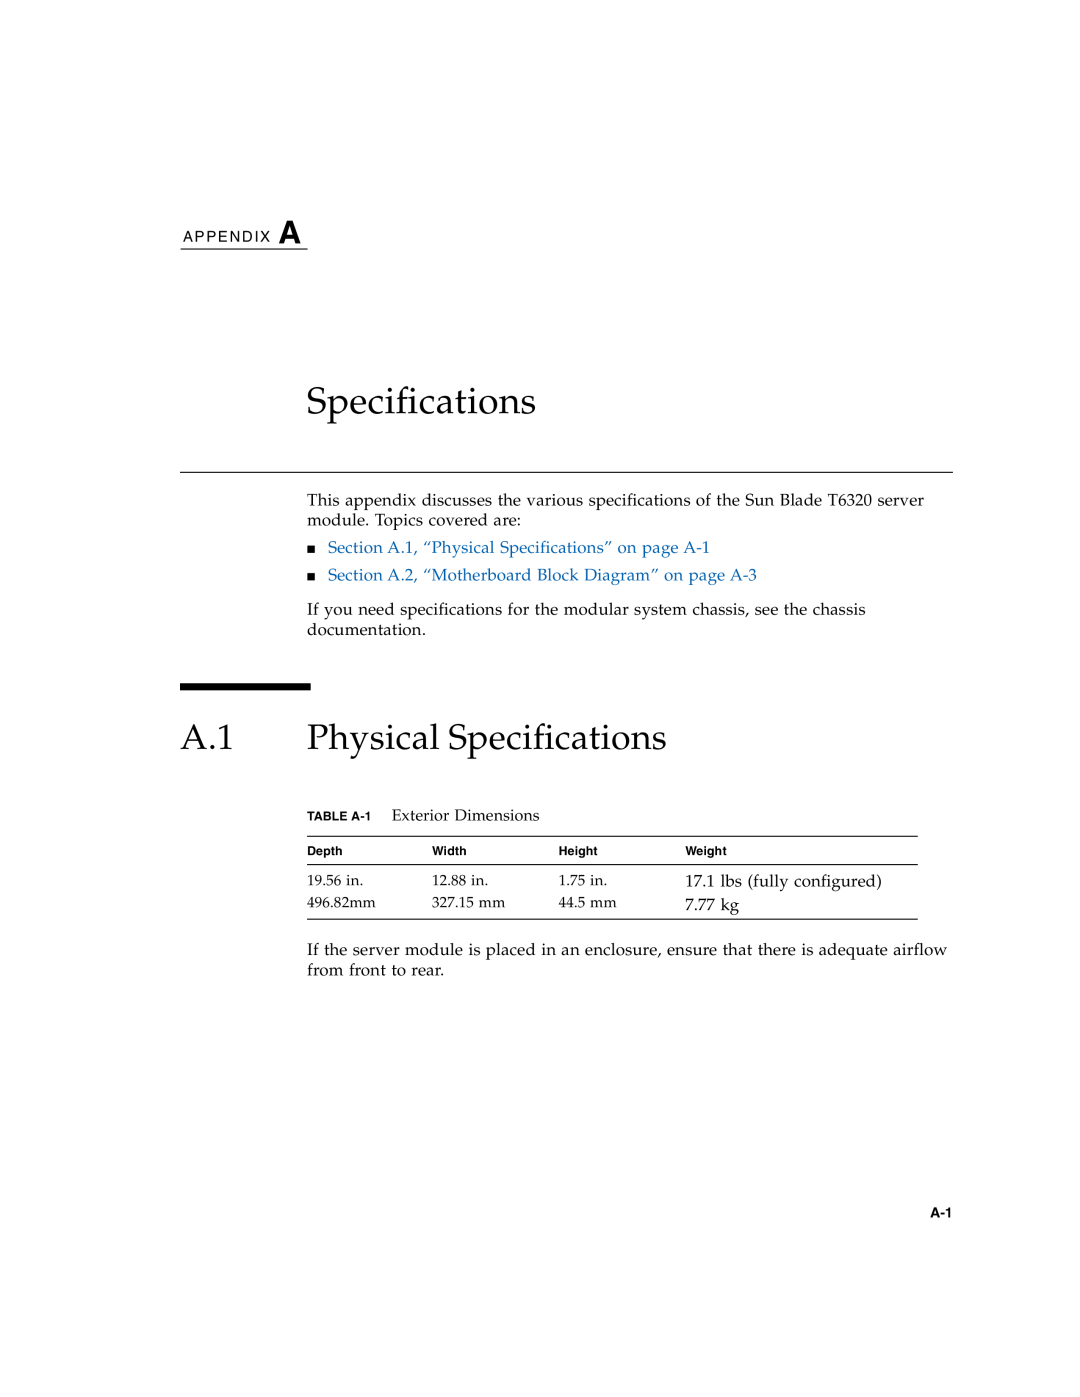 Sun Microsystems T6320 service manual A.1 Physical Specifications, Section A.1, “Physical Specifications” on page A-1 